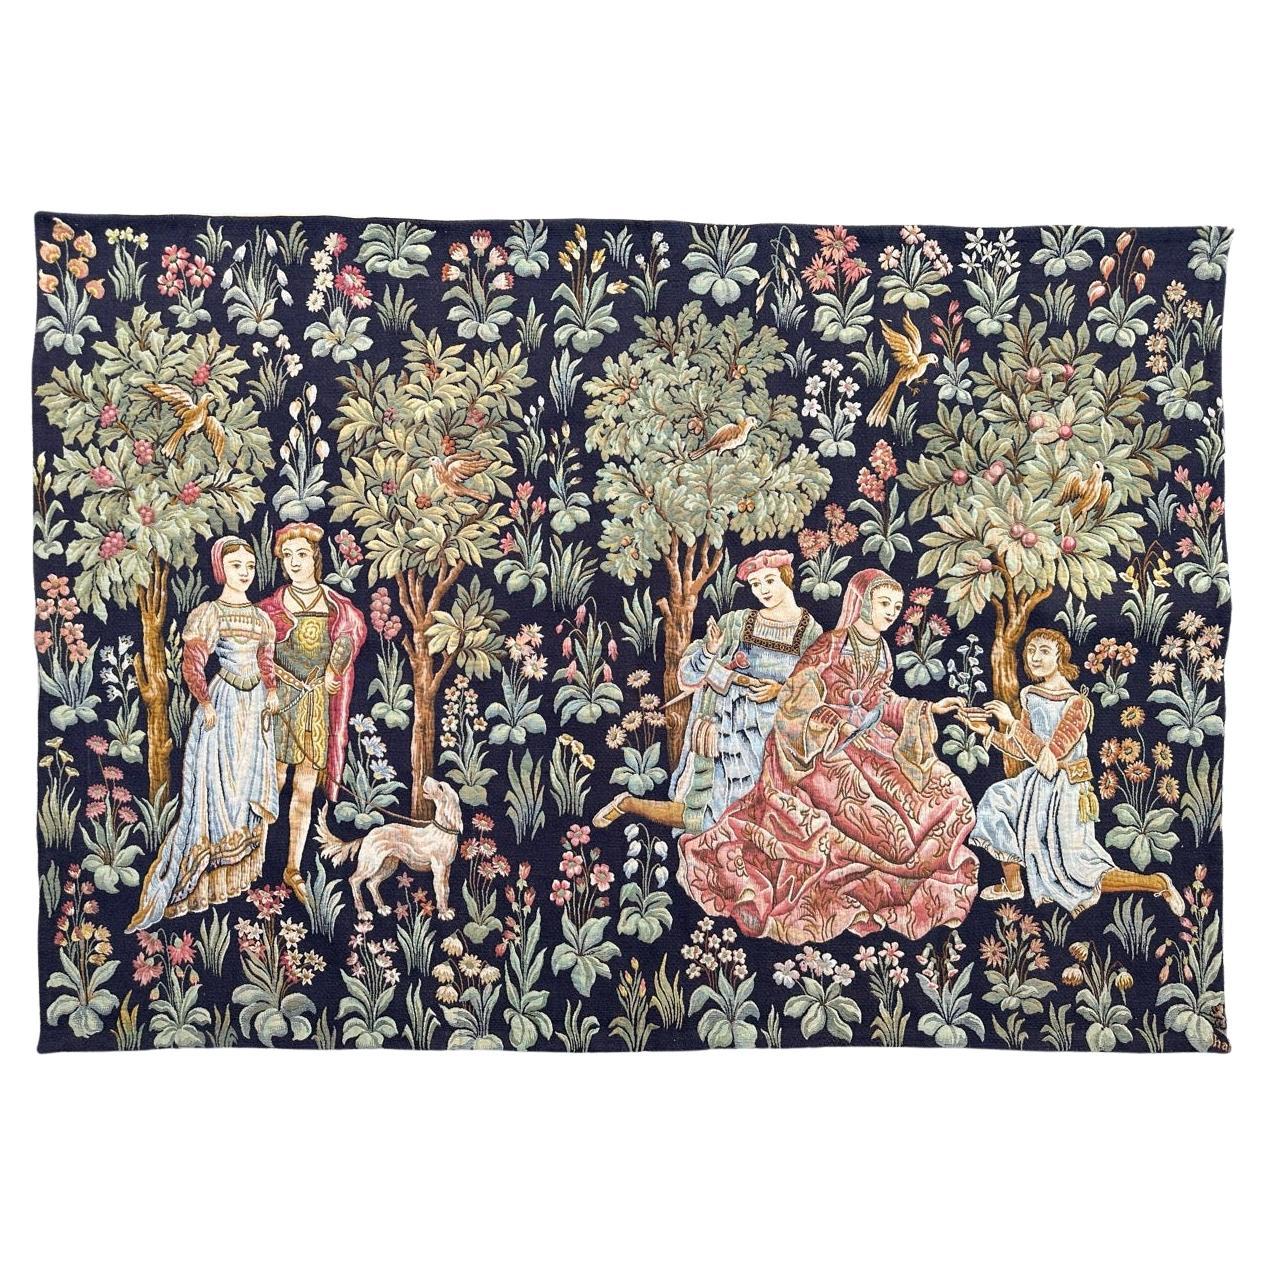 Bobyrug’s Pretty Jaquar Tapestry Aubusson Museum Style Medieval Design For Sale